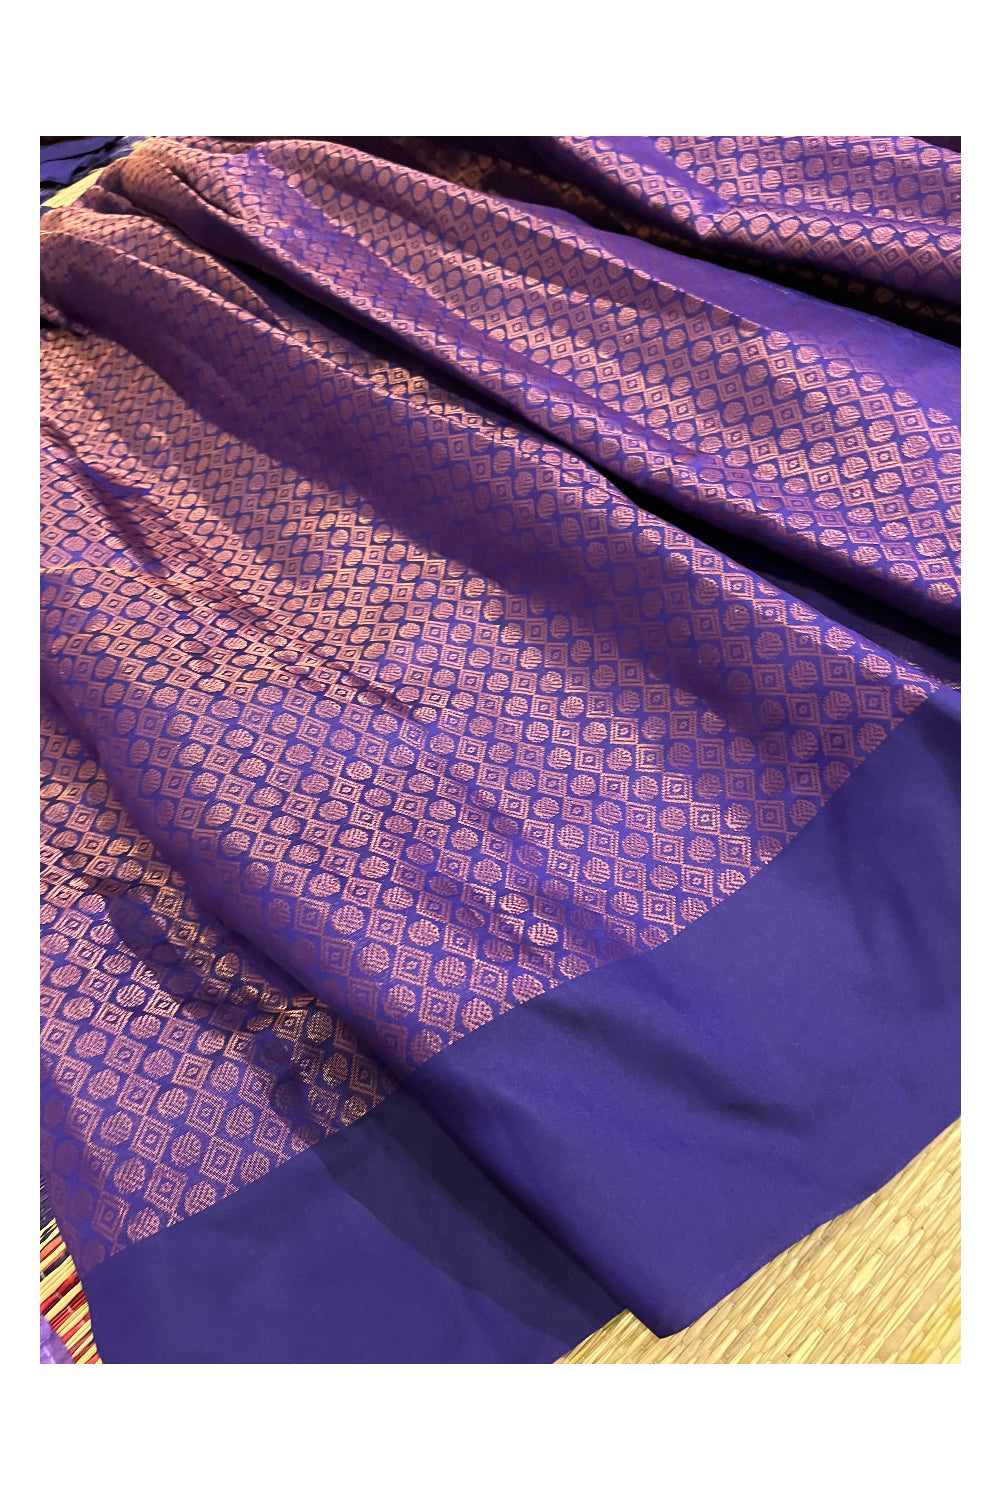 Southloom Semi Stitched Semi Silk Violet Dhavani Set include Neriyathu and Blouse Piece